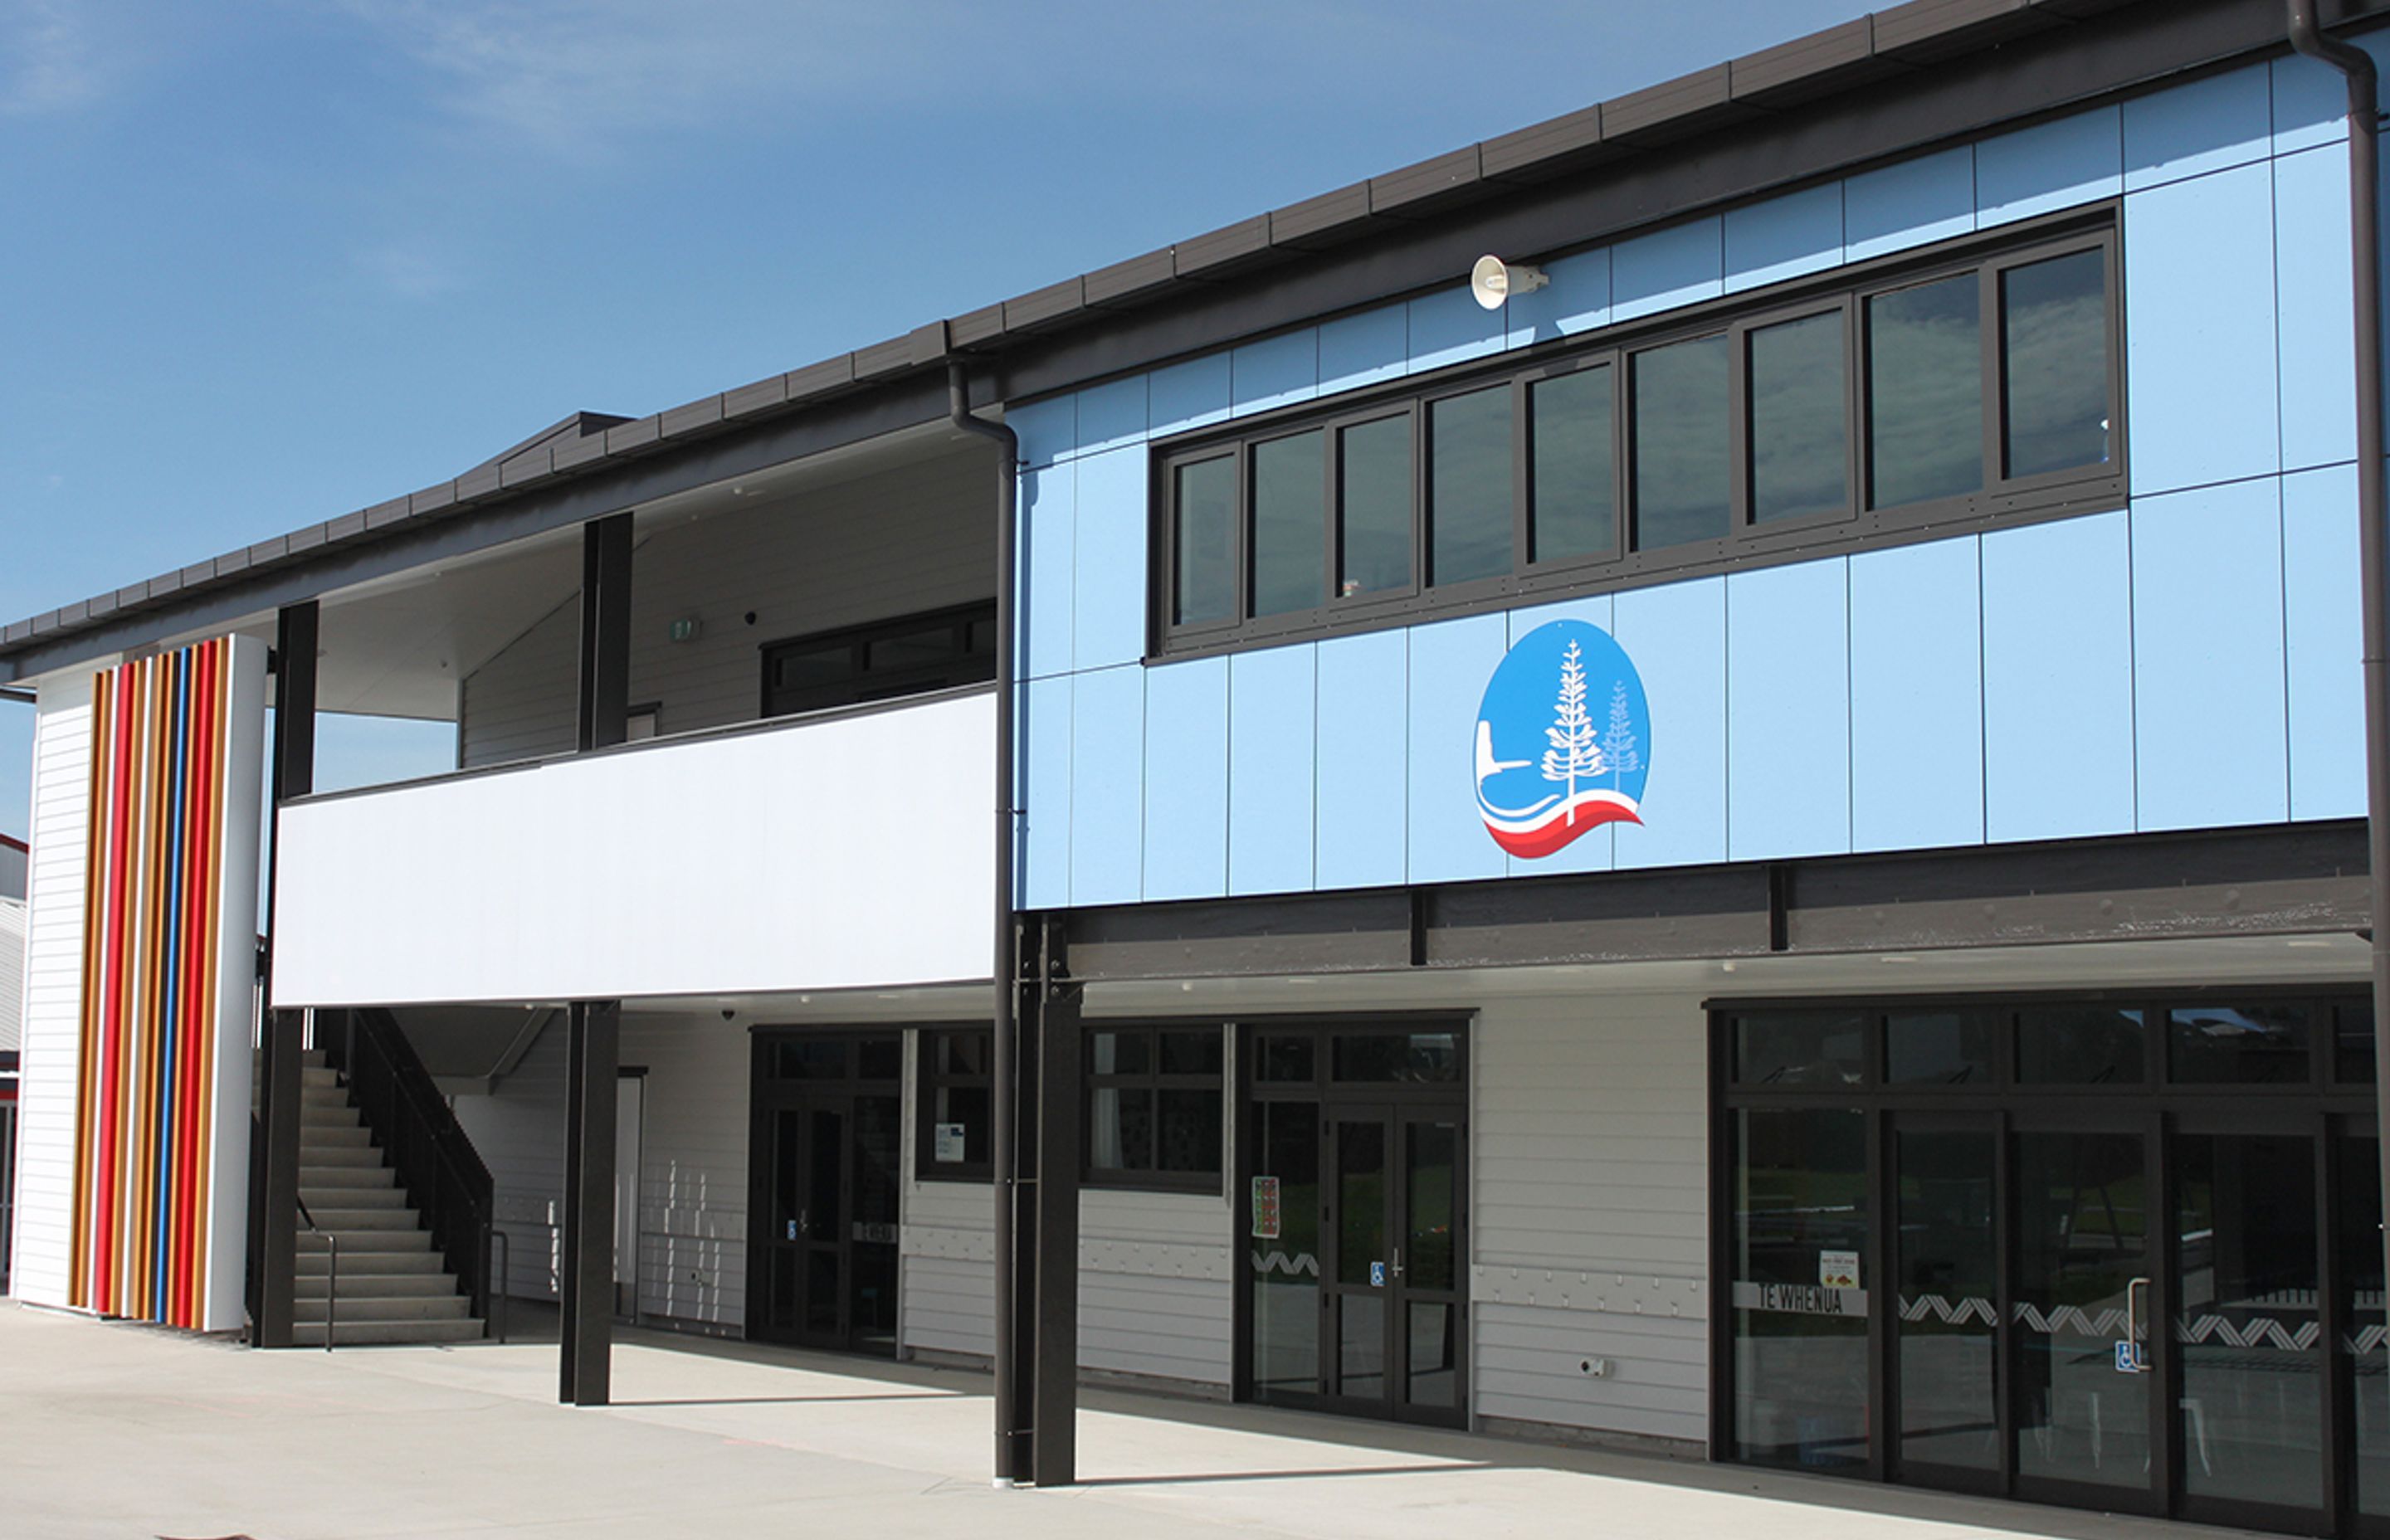 Browns Bay Primary